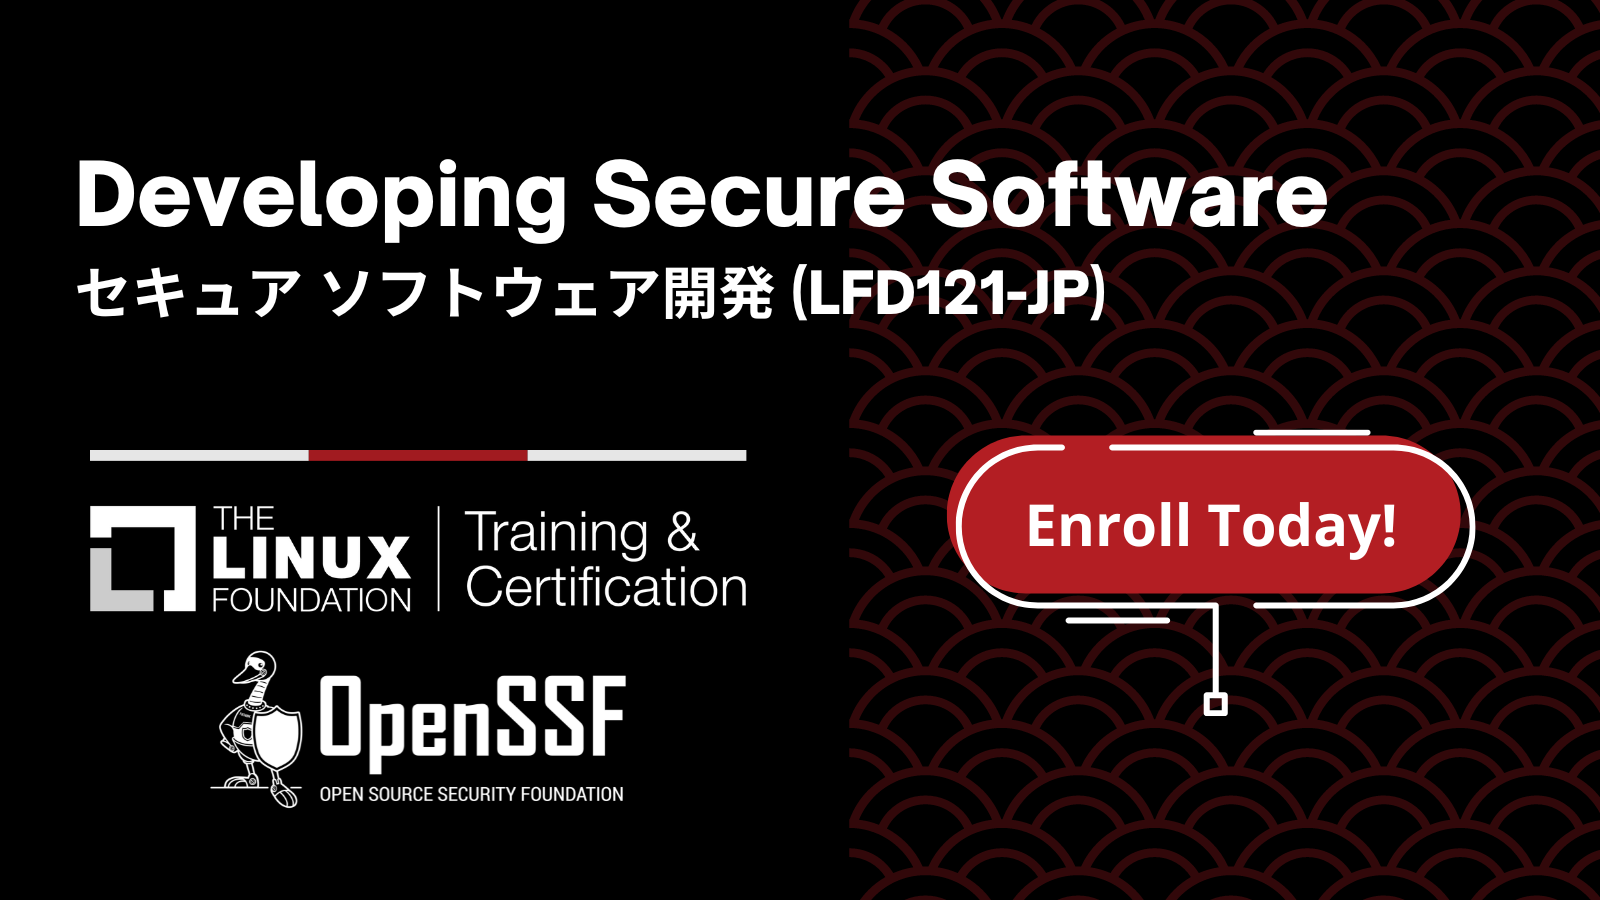 Developing Secure Software Training Course Japanese Enroll Today